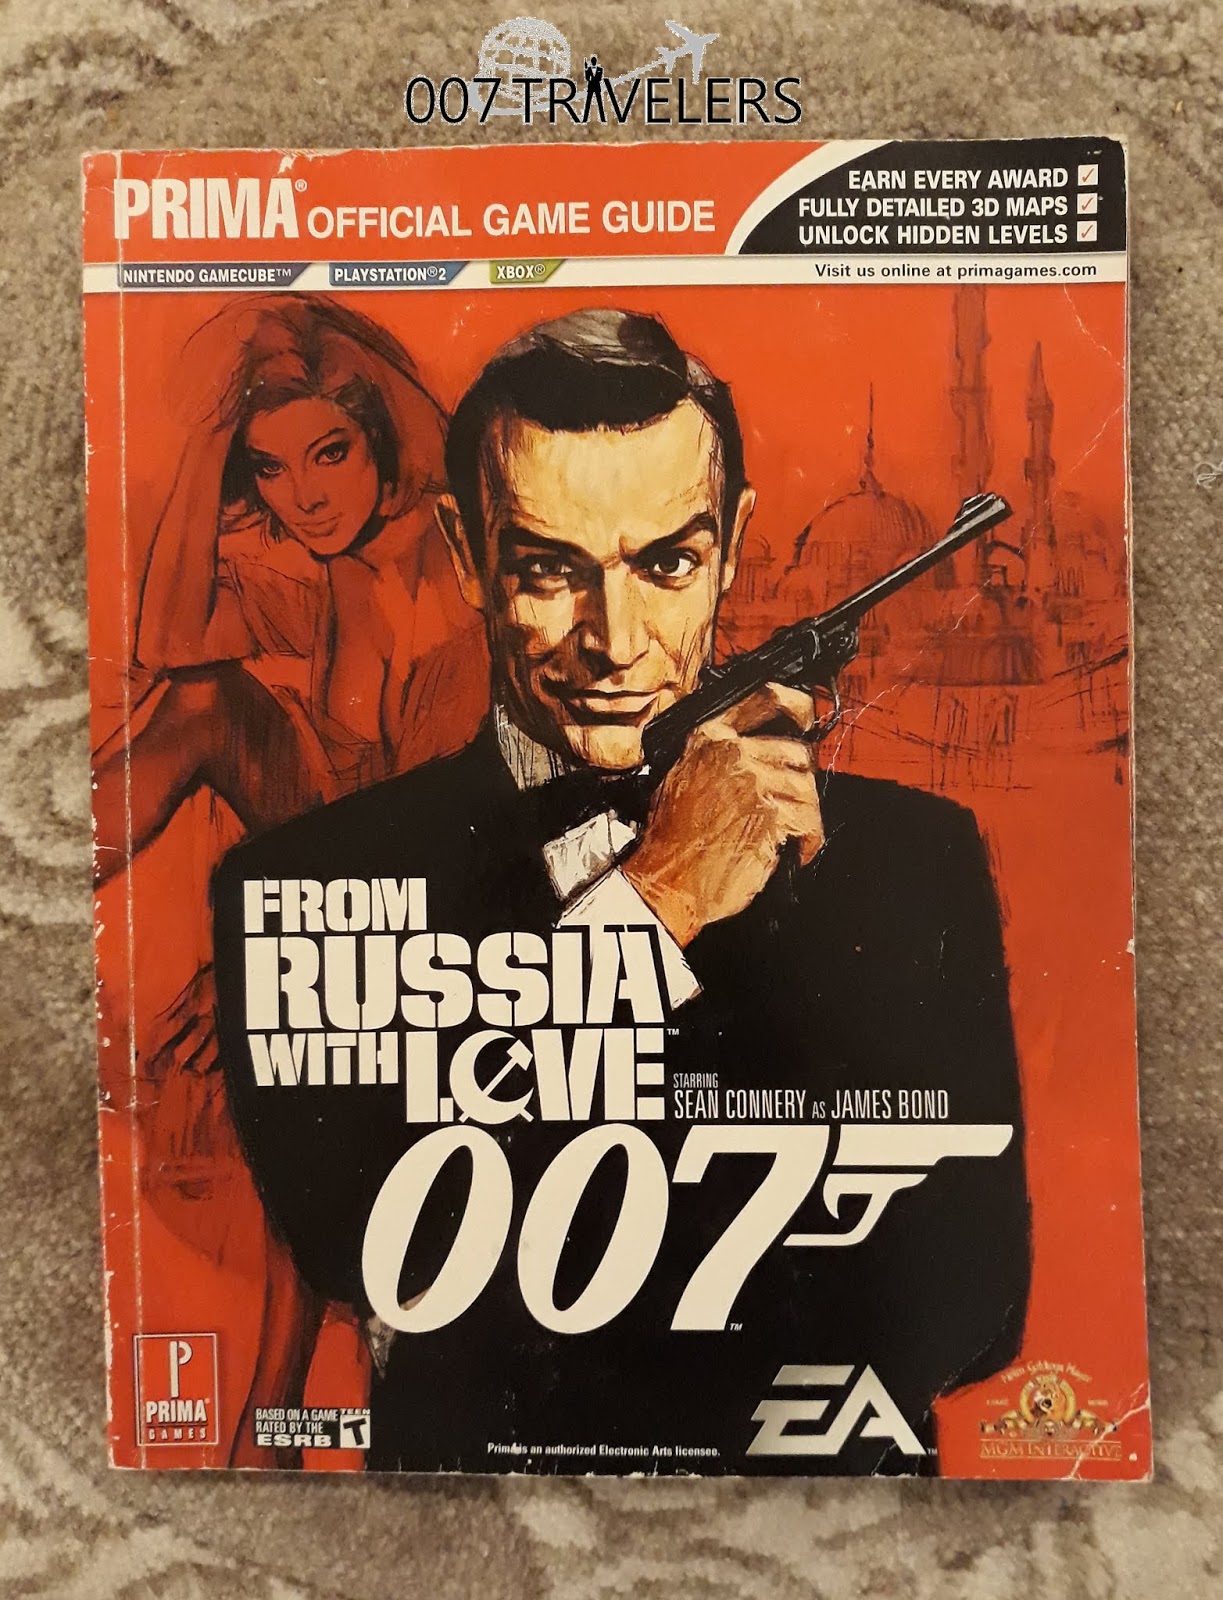 James Bond 007: from Russia with Love. From Russia with Love игра. James Bond 007: Blood Stone обложка. From Russia with Love book. 007 from russia with love